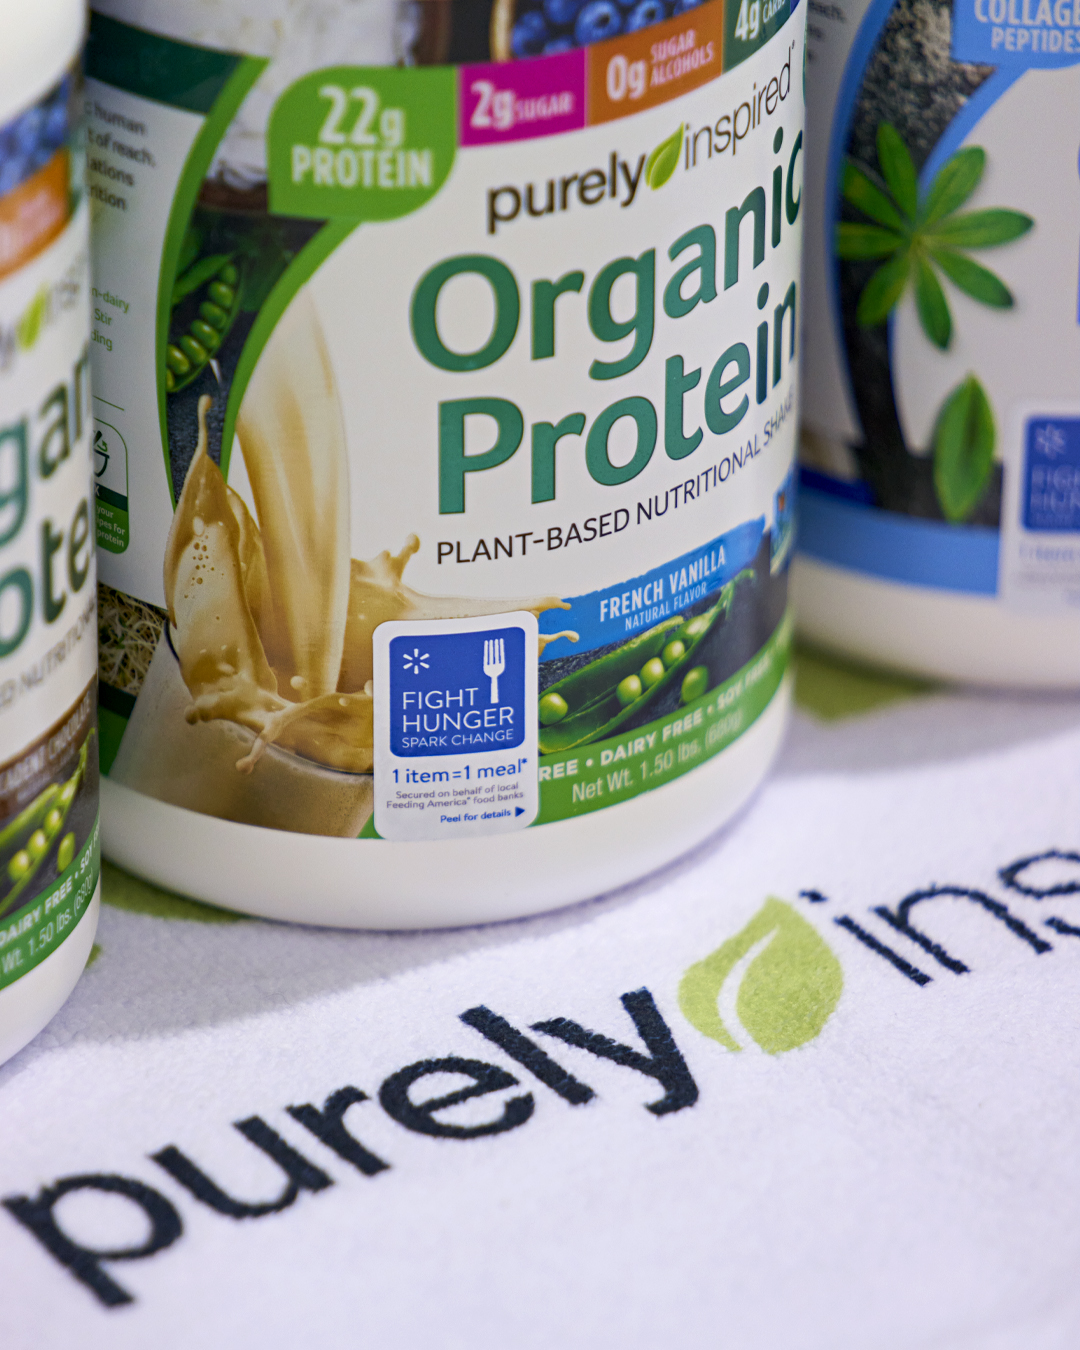 Purely Inspired® Hopes To Raise One Million Means For Feeding America